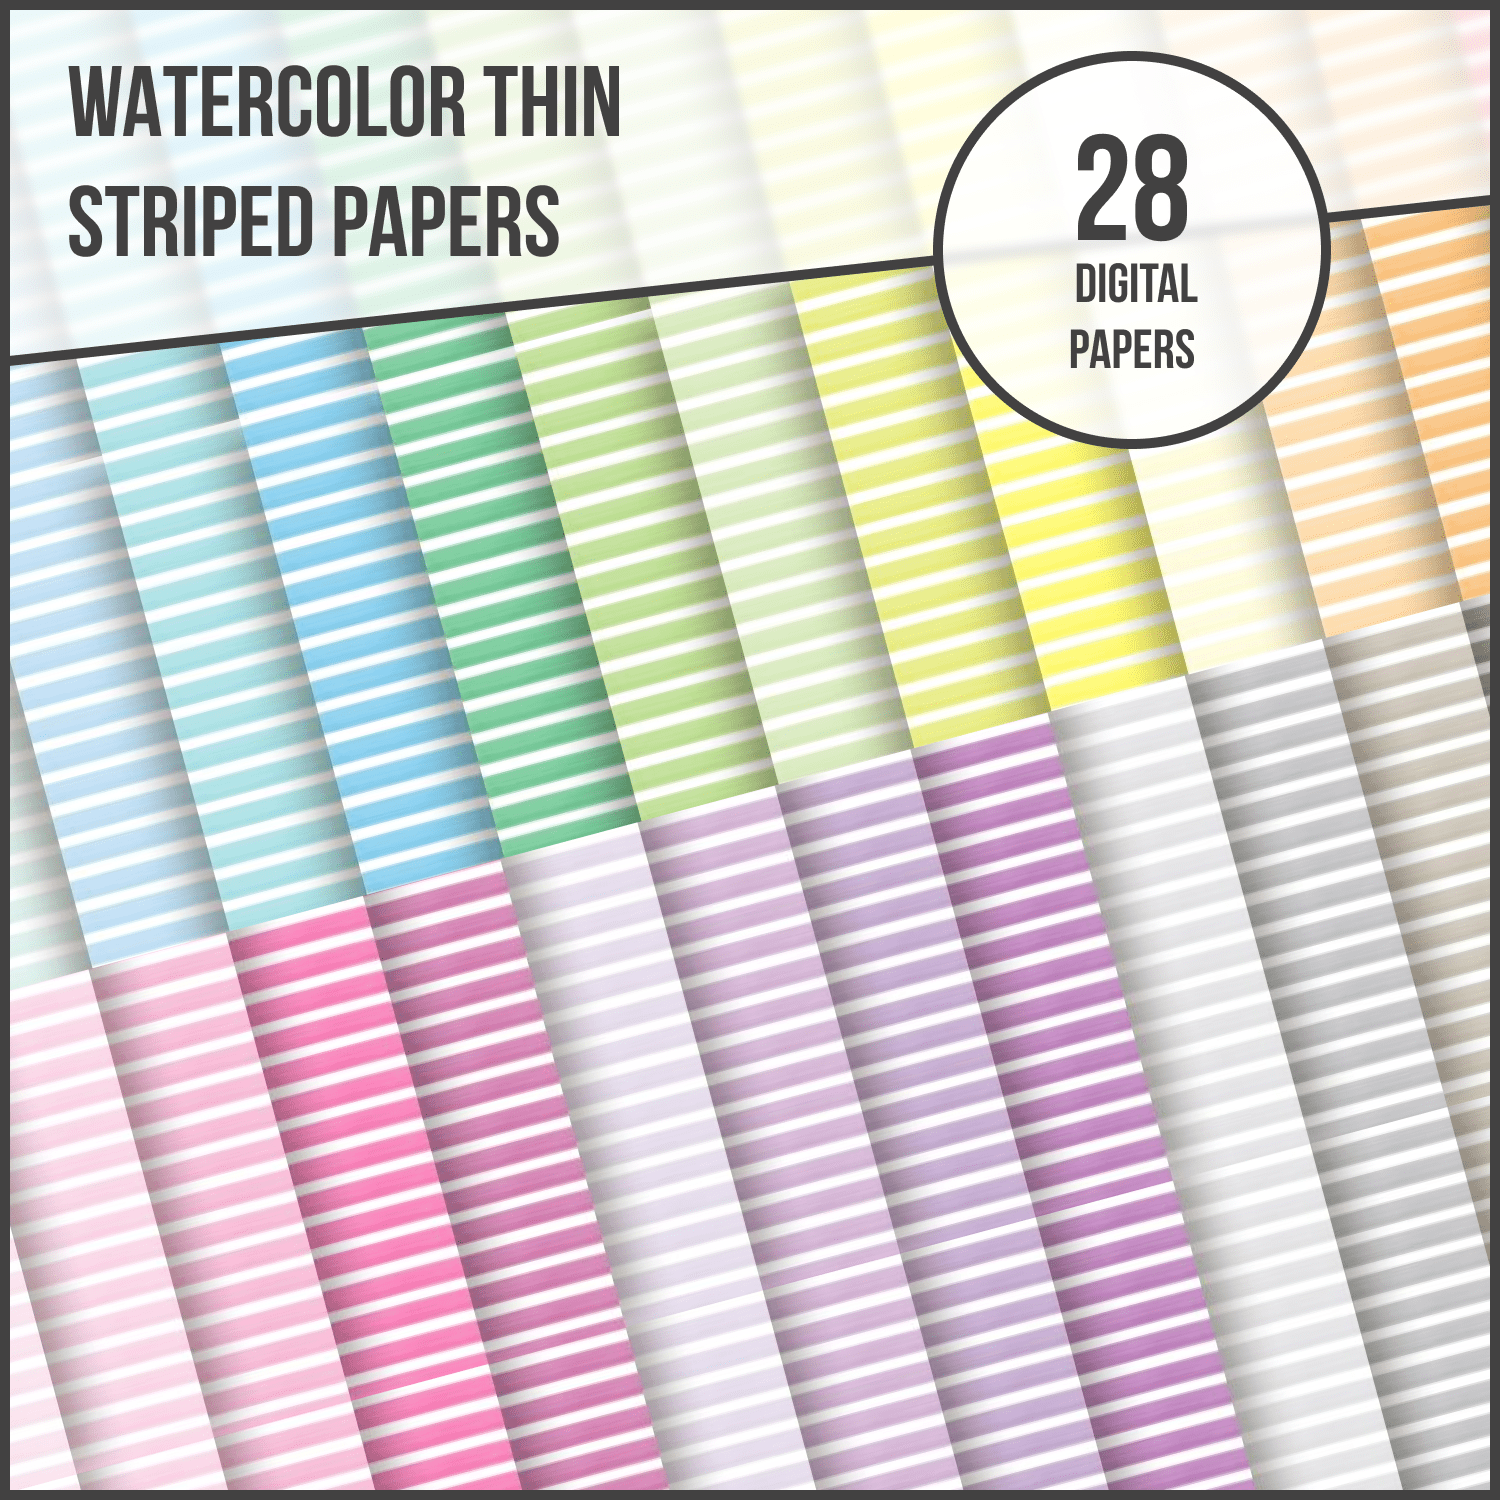 Watercolor Thin Striped Papers.